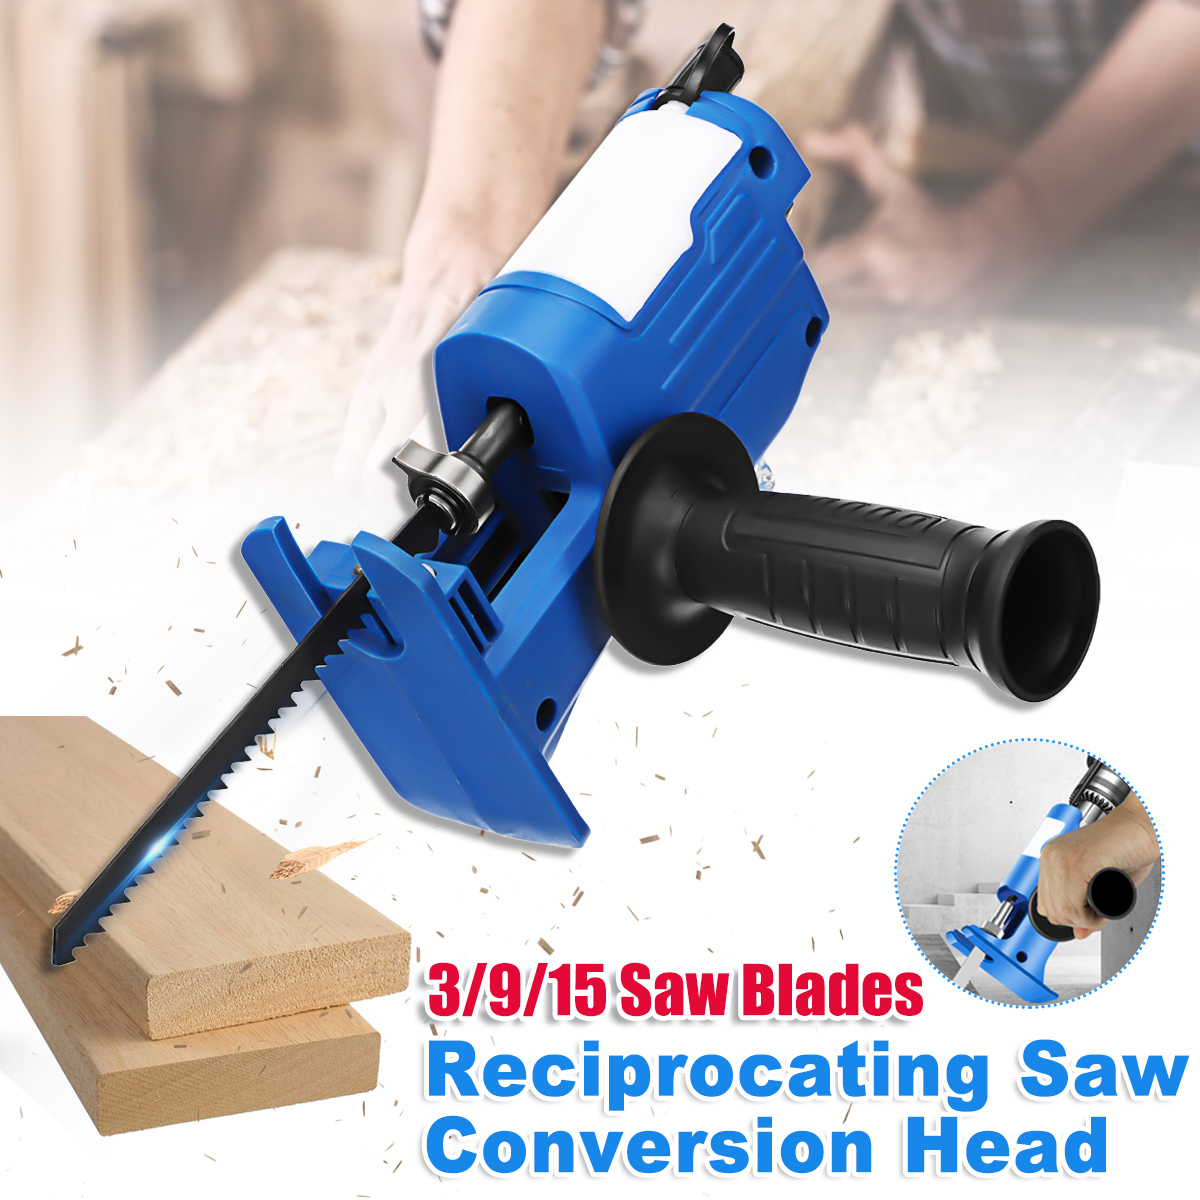 Reciprocating-Saw-Attachment-for-Electric-Drill-Wood-Metal-Cutting-Tool-1865626-1